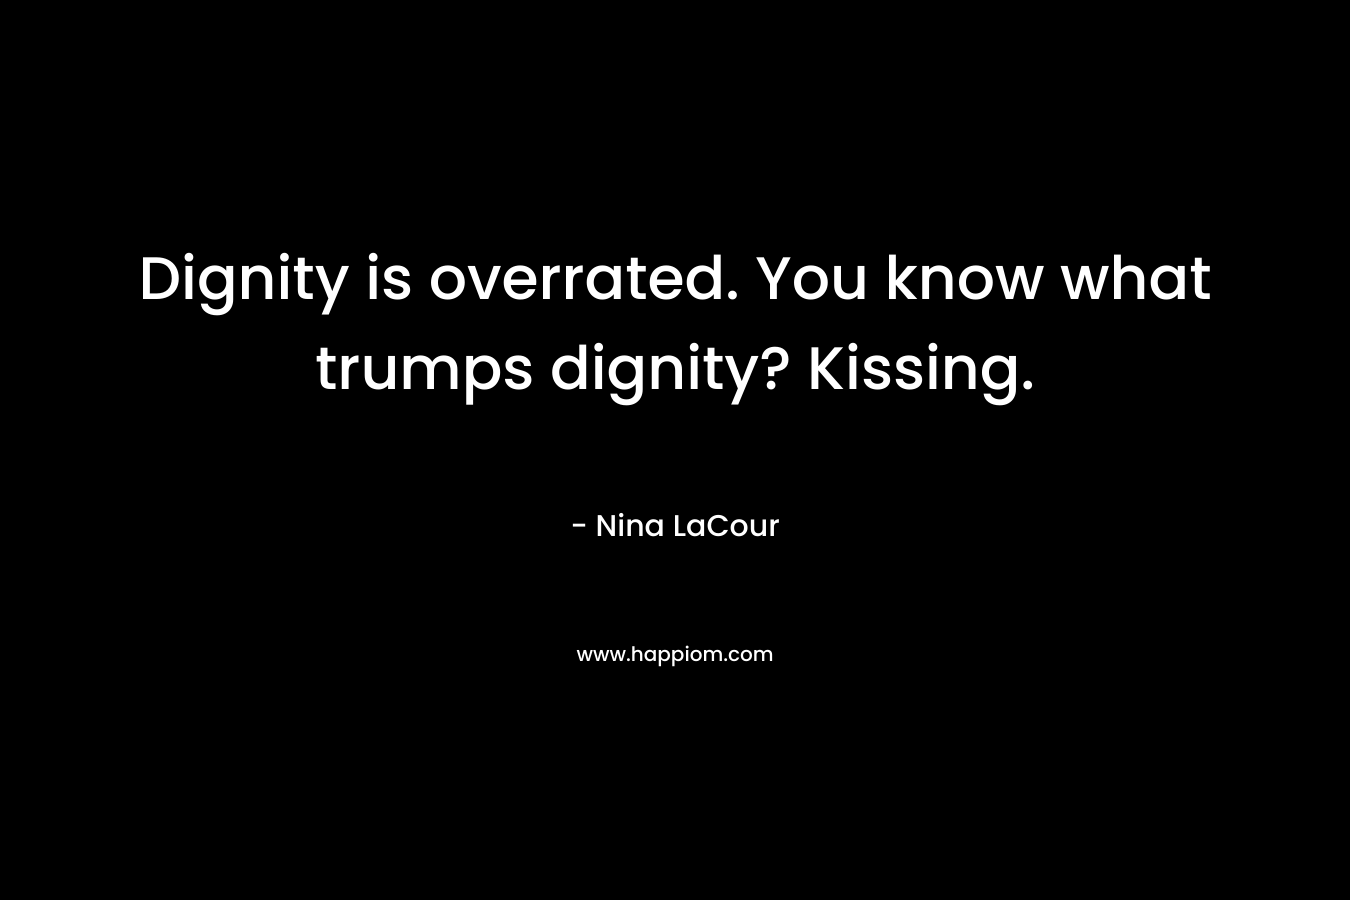 Dignity is overrated. You know what trumps dignity? Kissing.